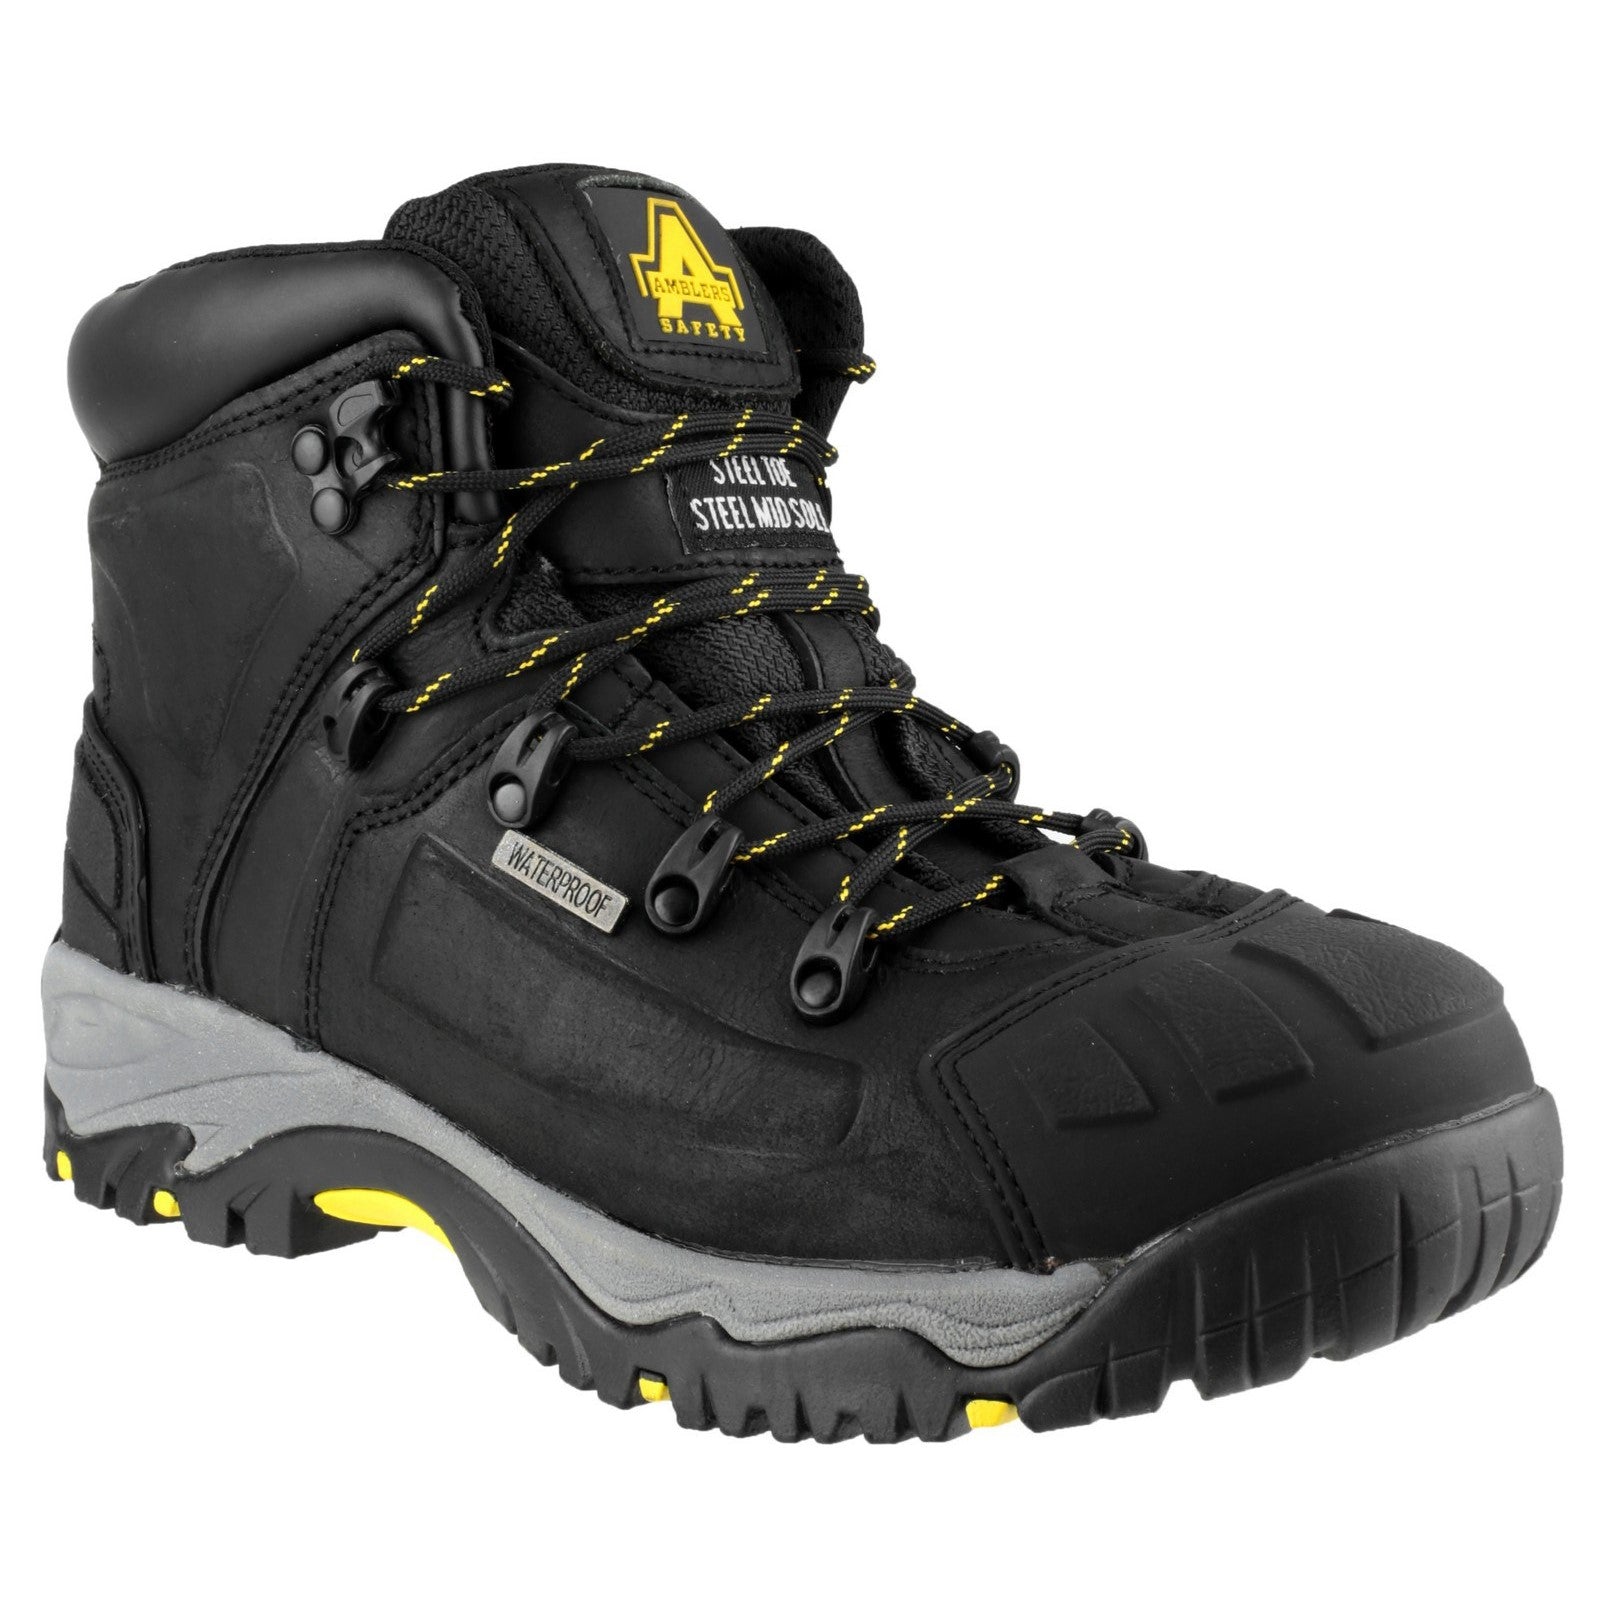 Amblers Safety AS803 Waterproof Wide Fit Safety Boot